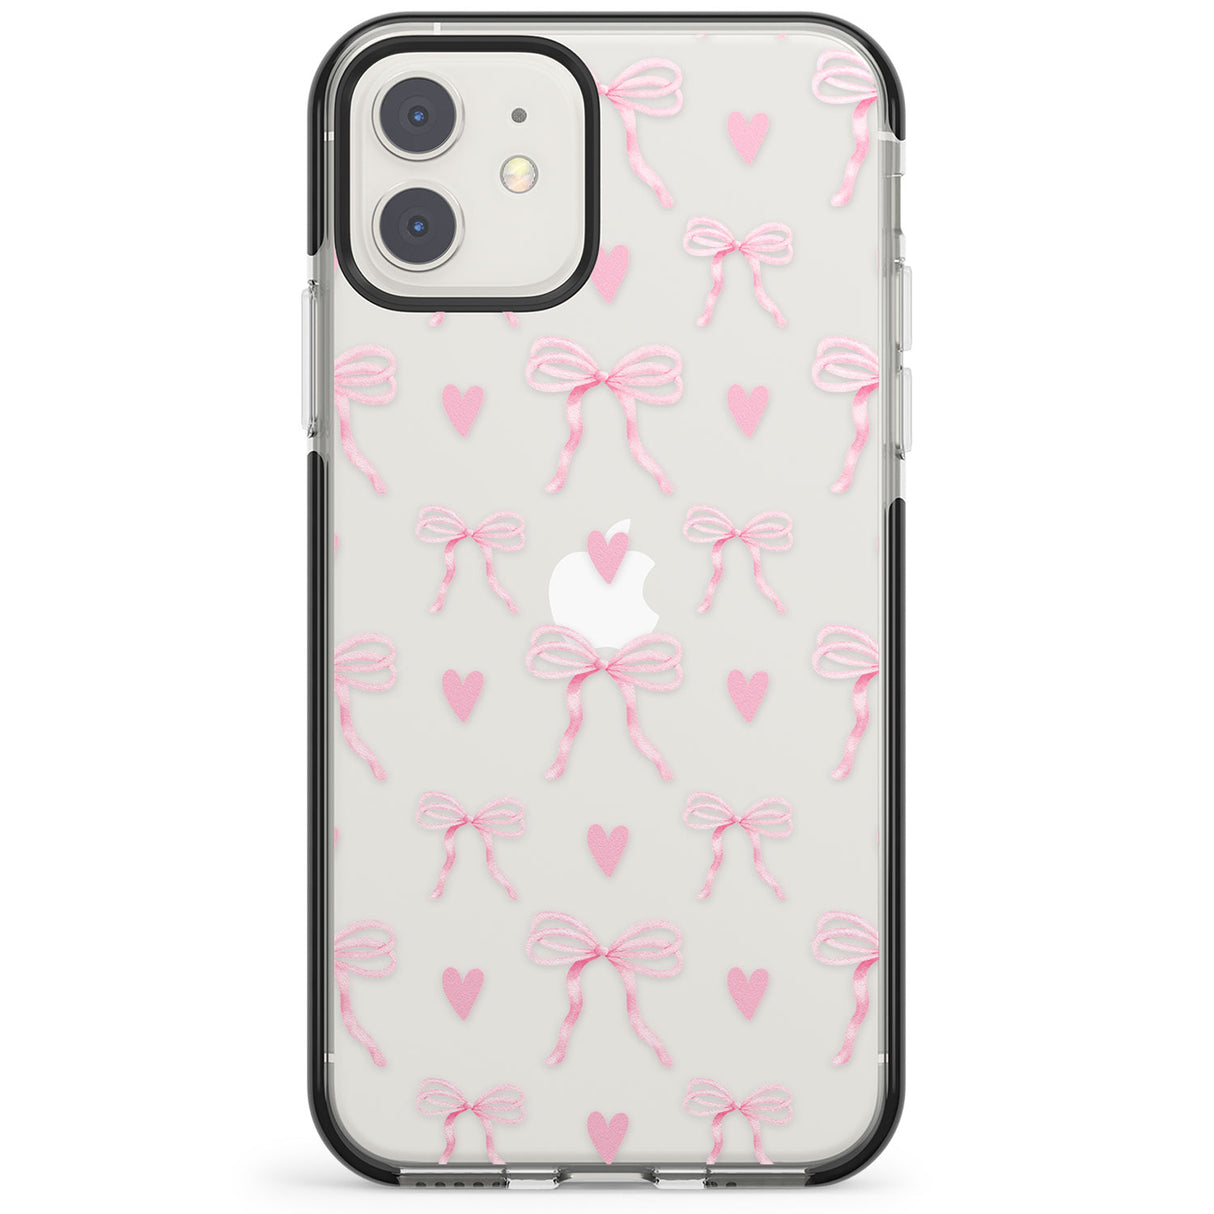 Pink Bows & Hearts Impact Phone Case for iPhone 11, iphone 12